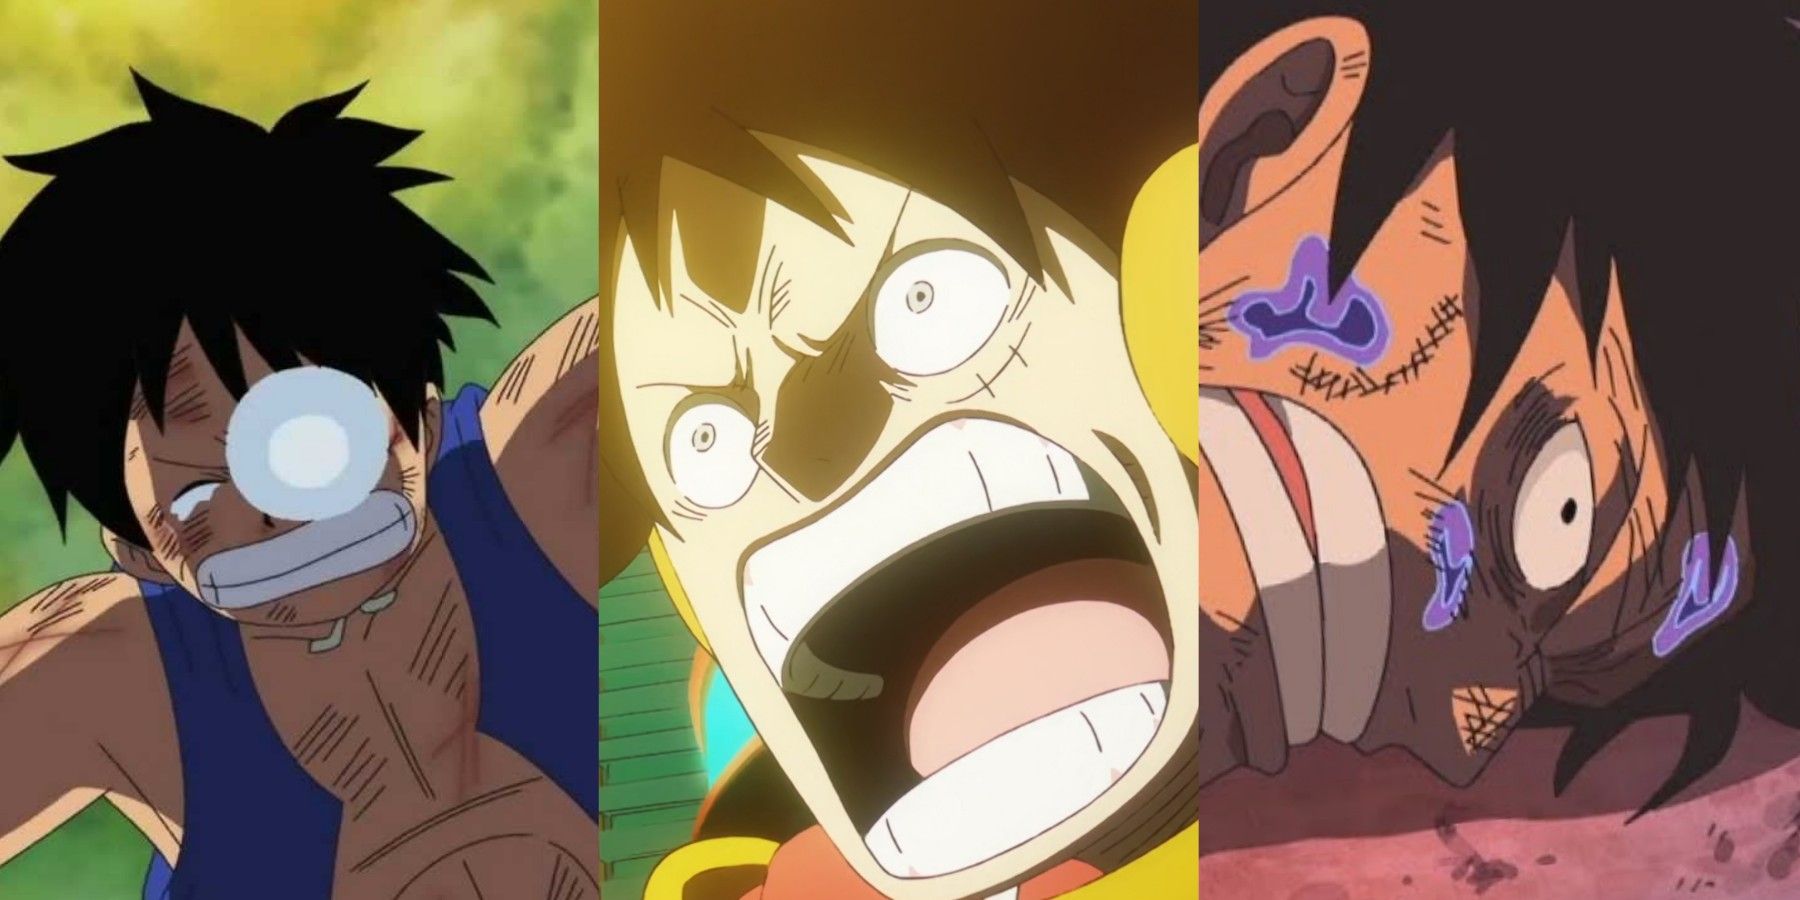 Top 5 Real World Issues Tackled by One Piece